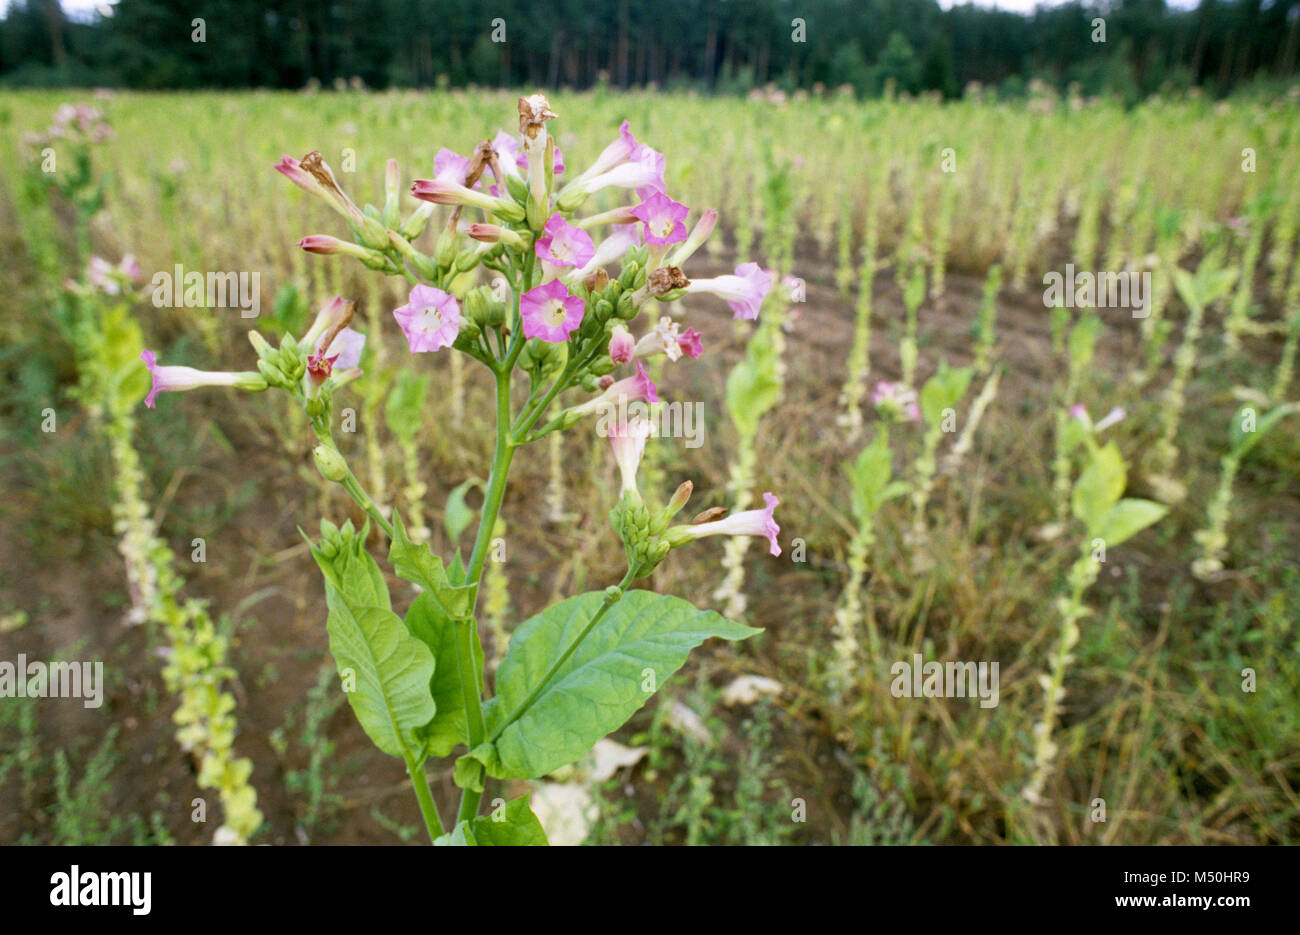 Field of tobacco plants growing in a field the Augustow region of north east Poland August 2007 Stock Photo